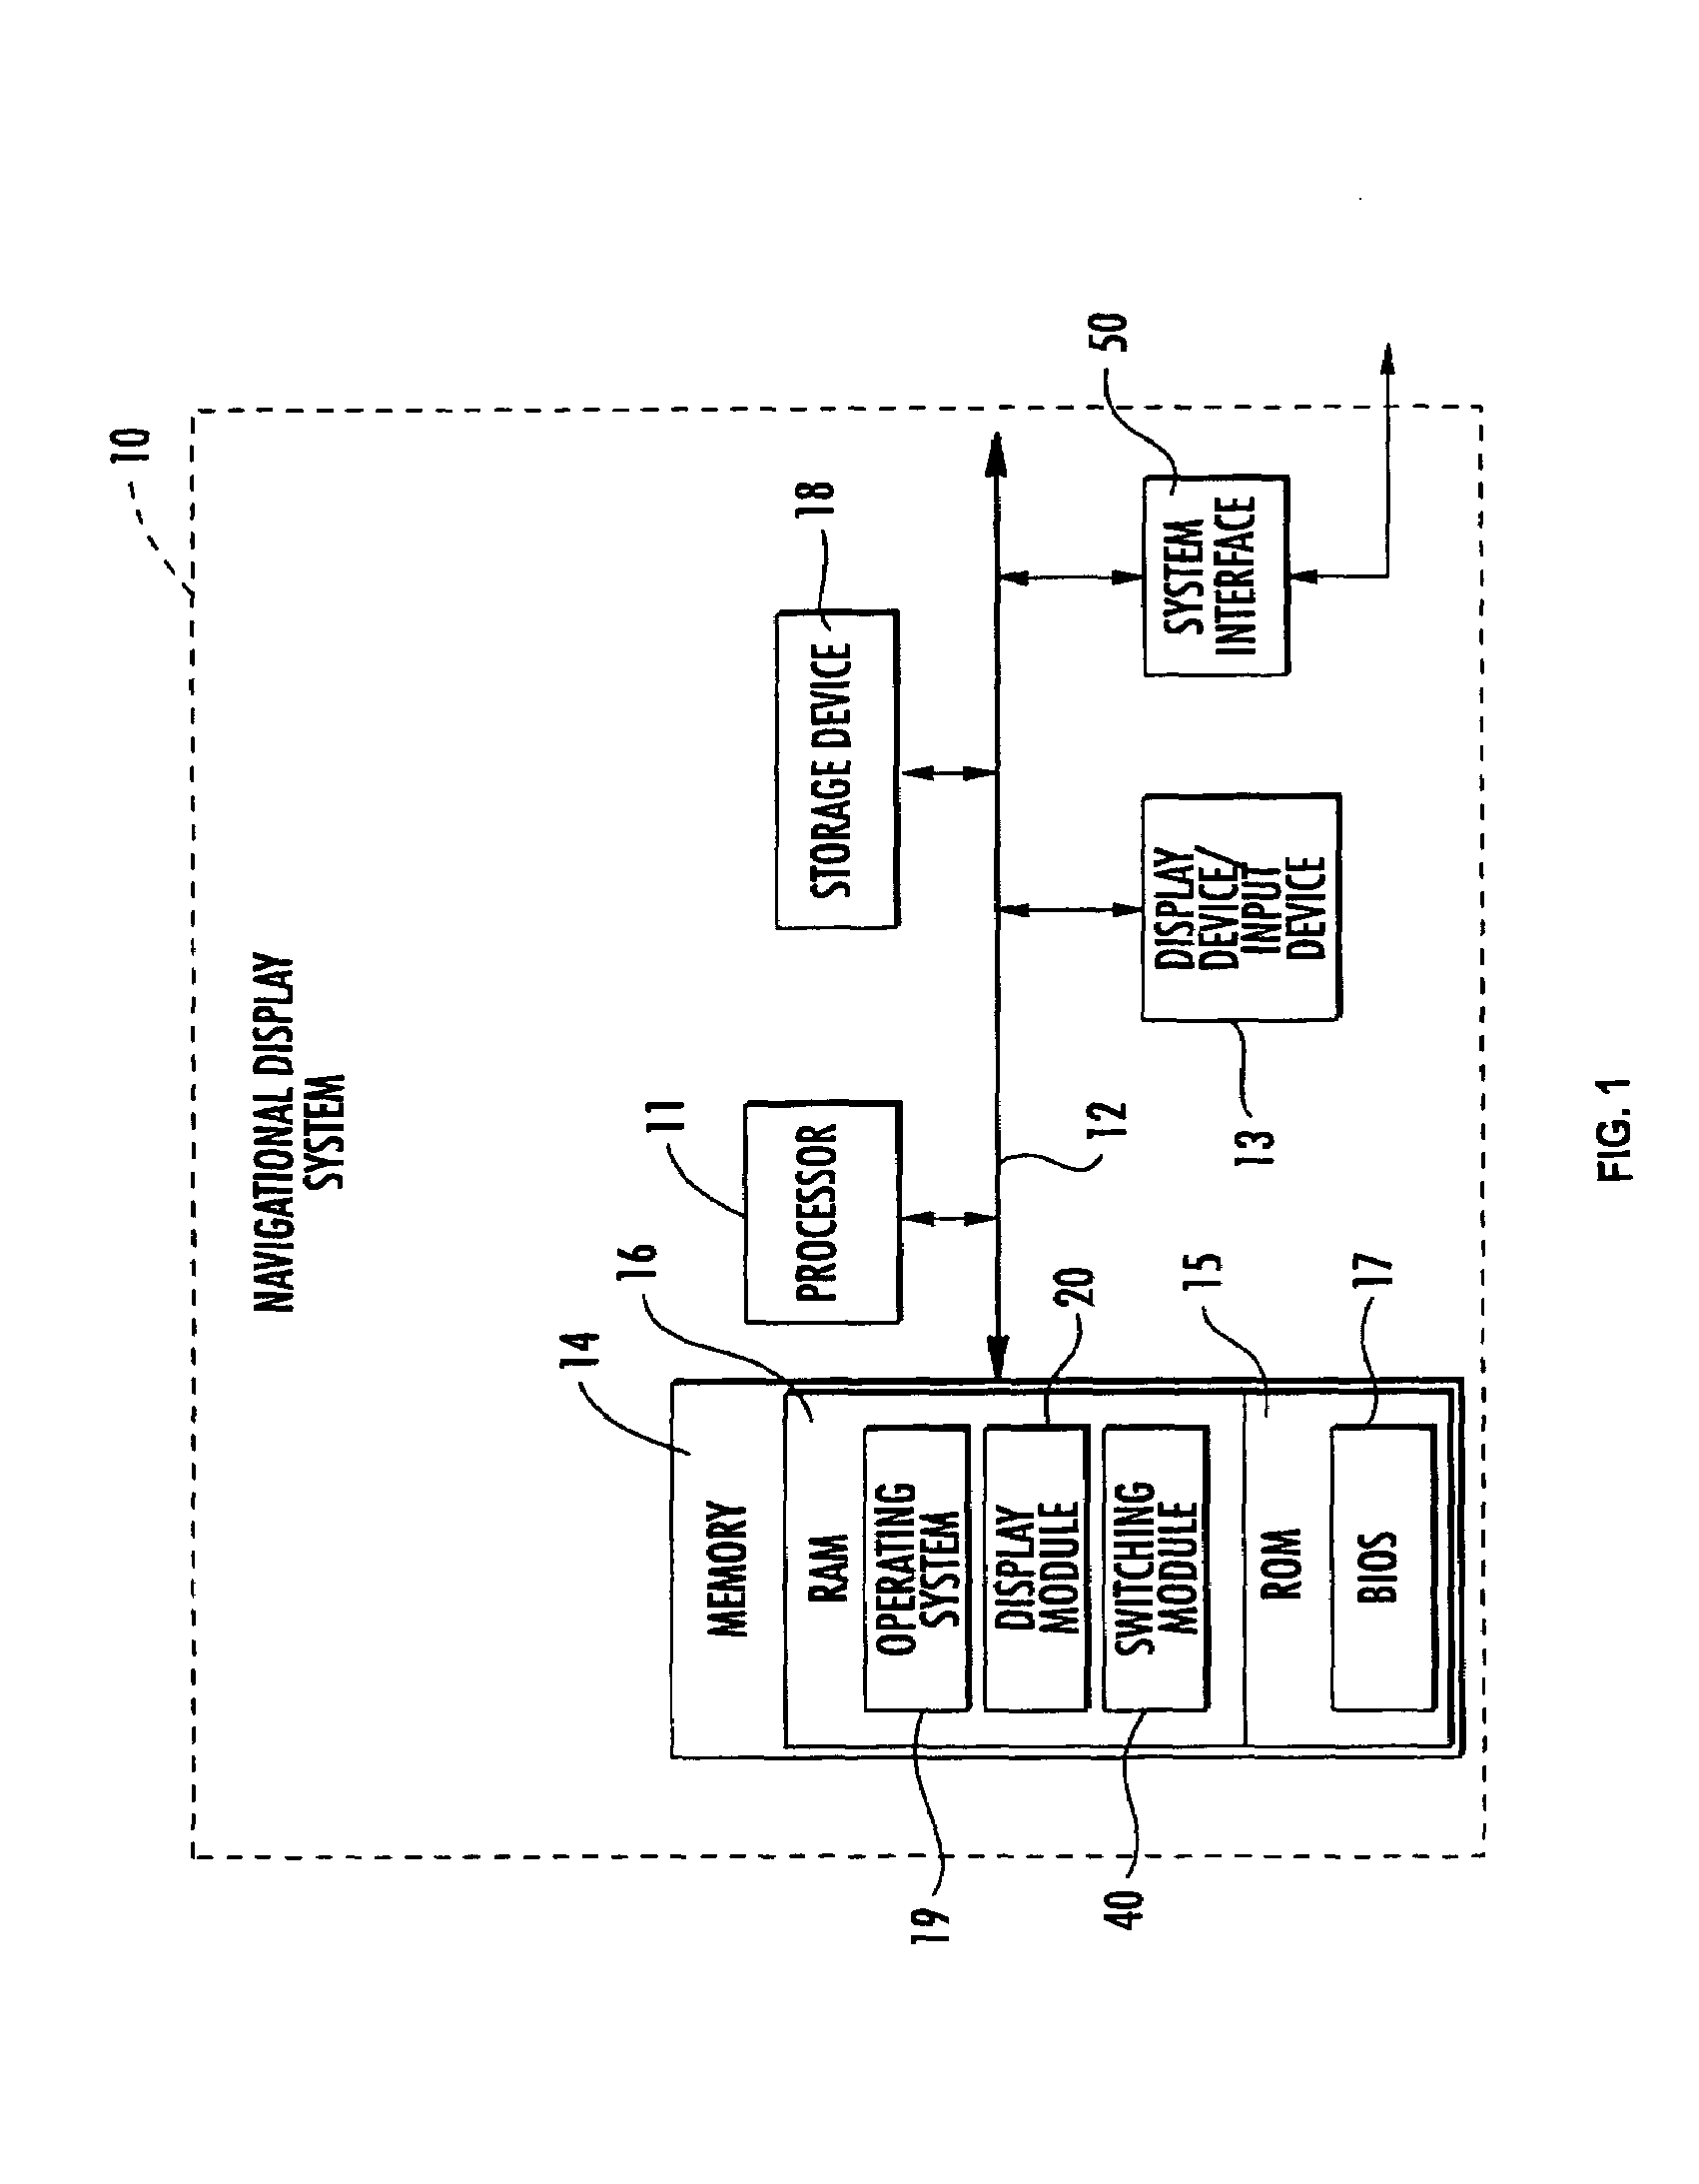 Navigational instrument, method and computer program product for displaying ground traffic information